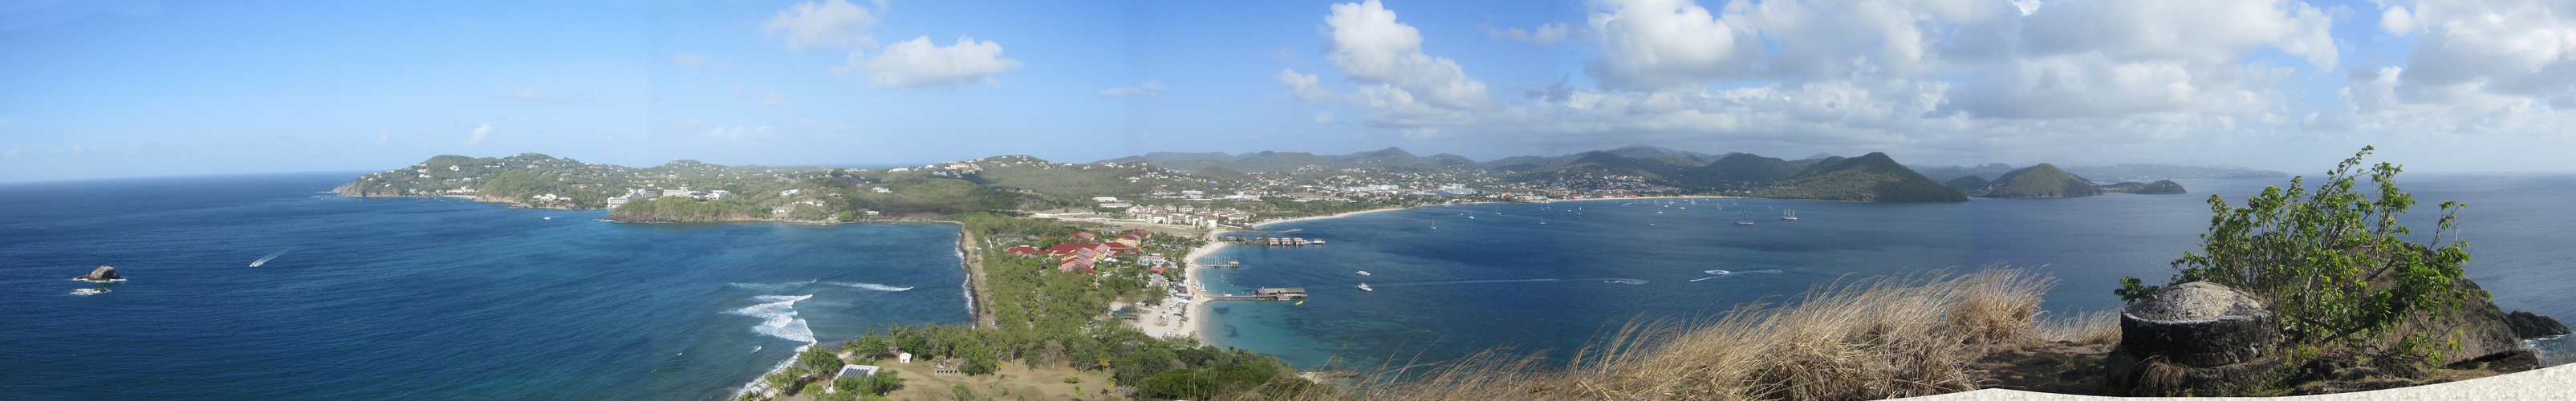 Panoramic view from Signal Peak on Pigeon Island - Cap Estate to the left, the red roofs of Sandals in the middle on the causeway,
        and Rodney Bay on the right.